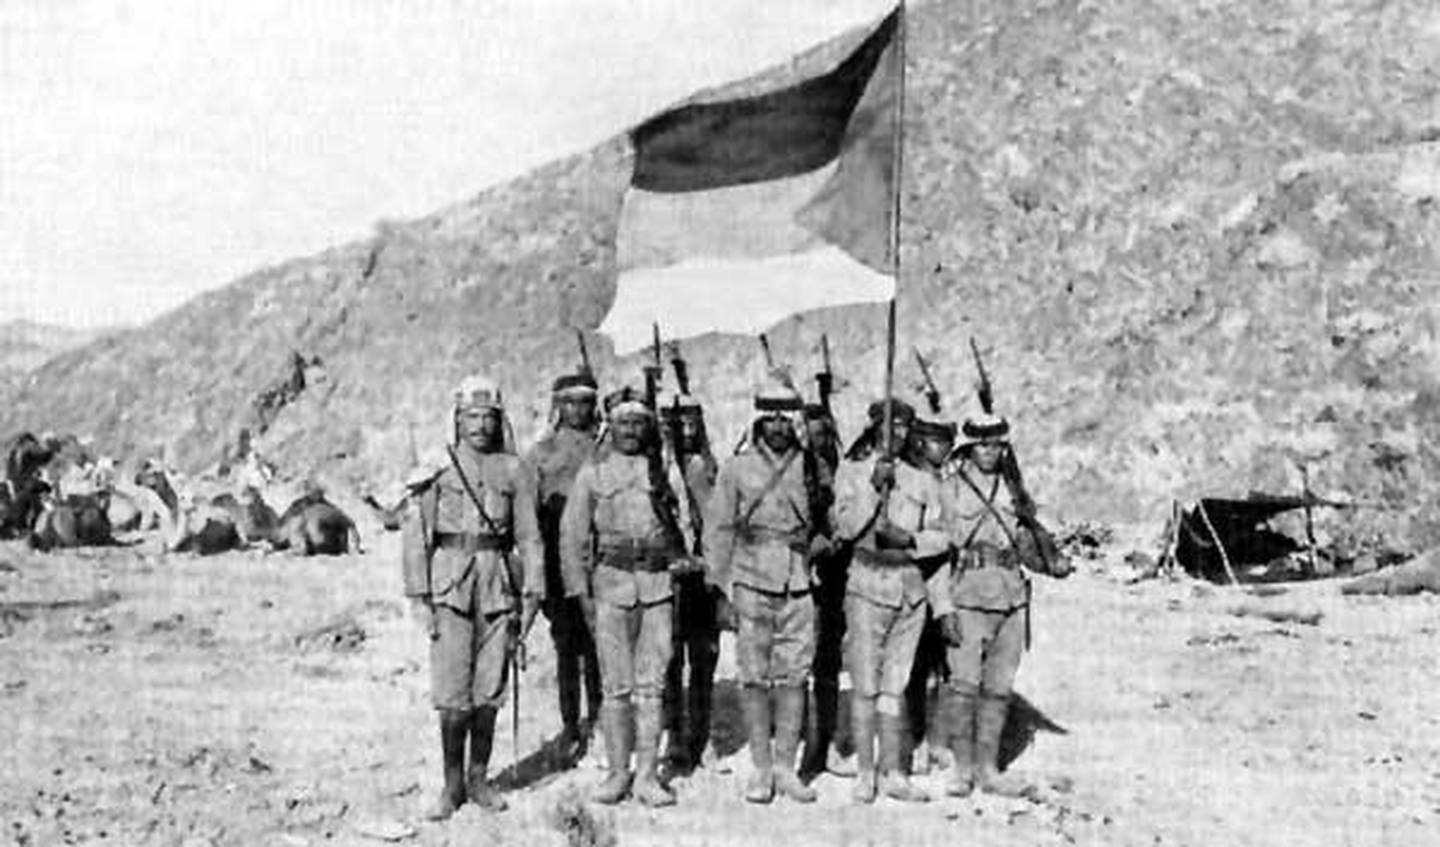 Arab soldiers carry the flag of the Arab Revolt of 1916-1918 in the Arabian desert.